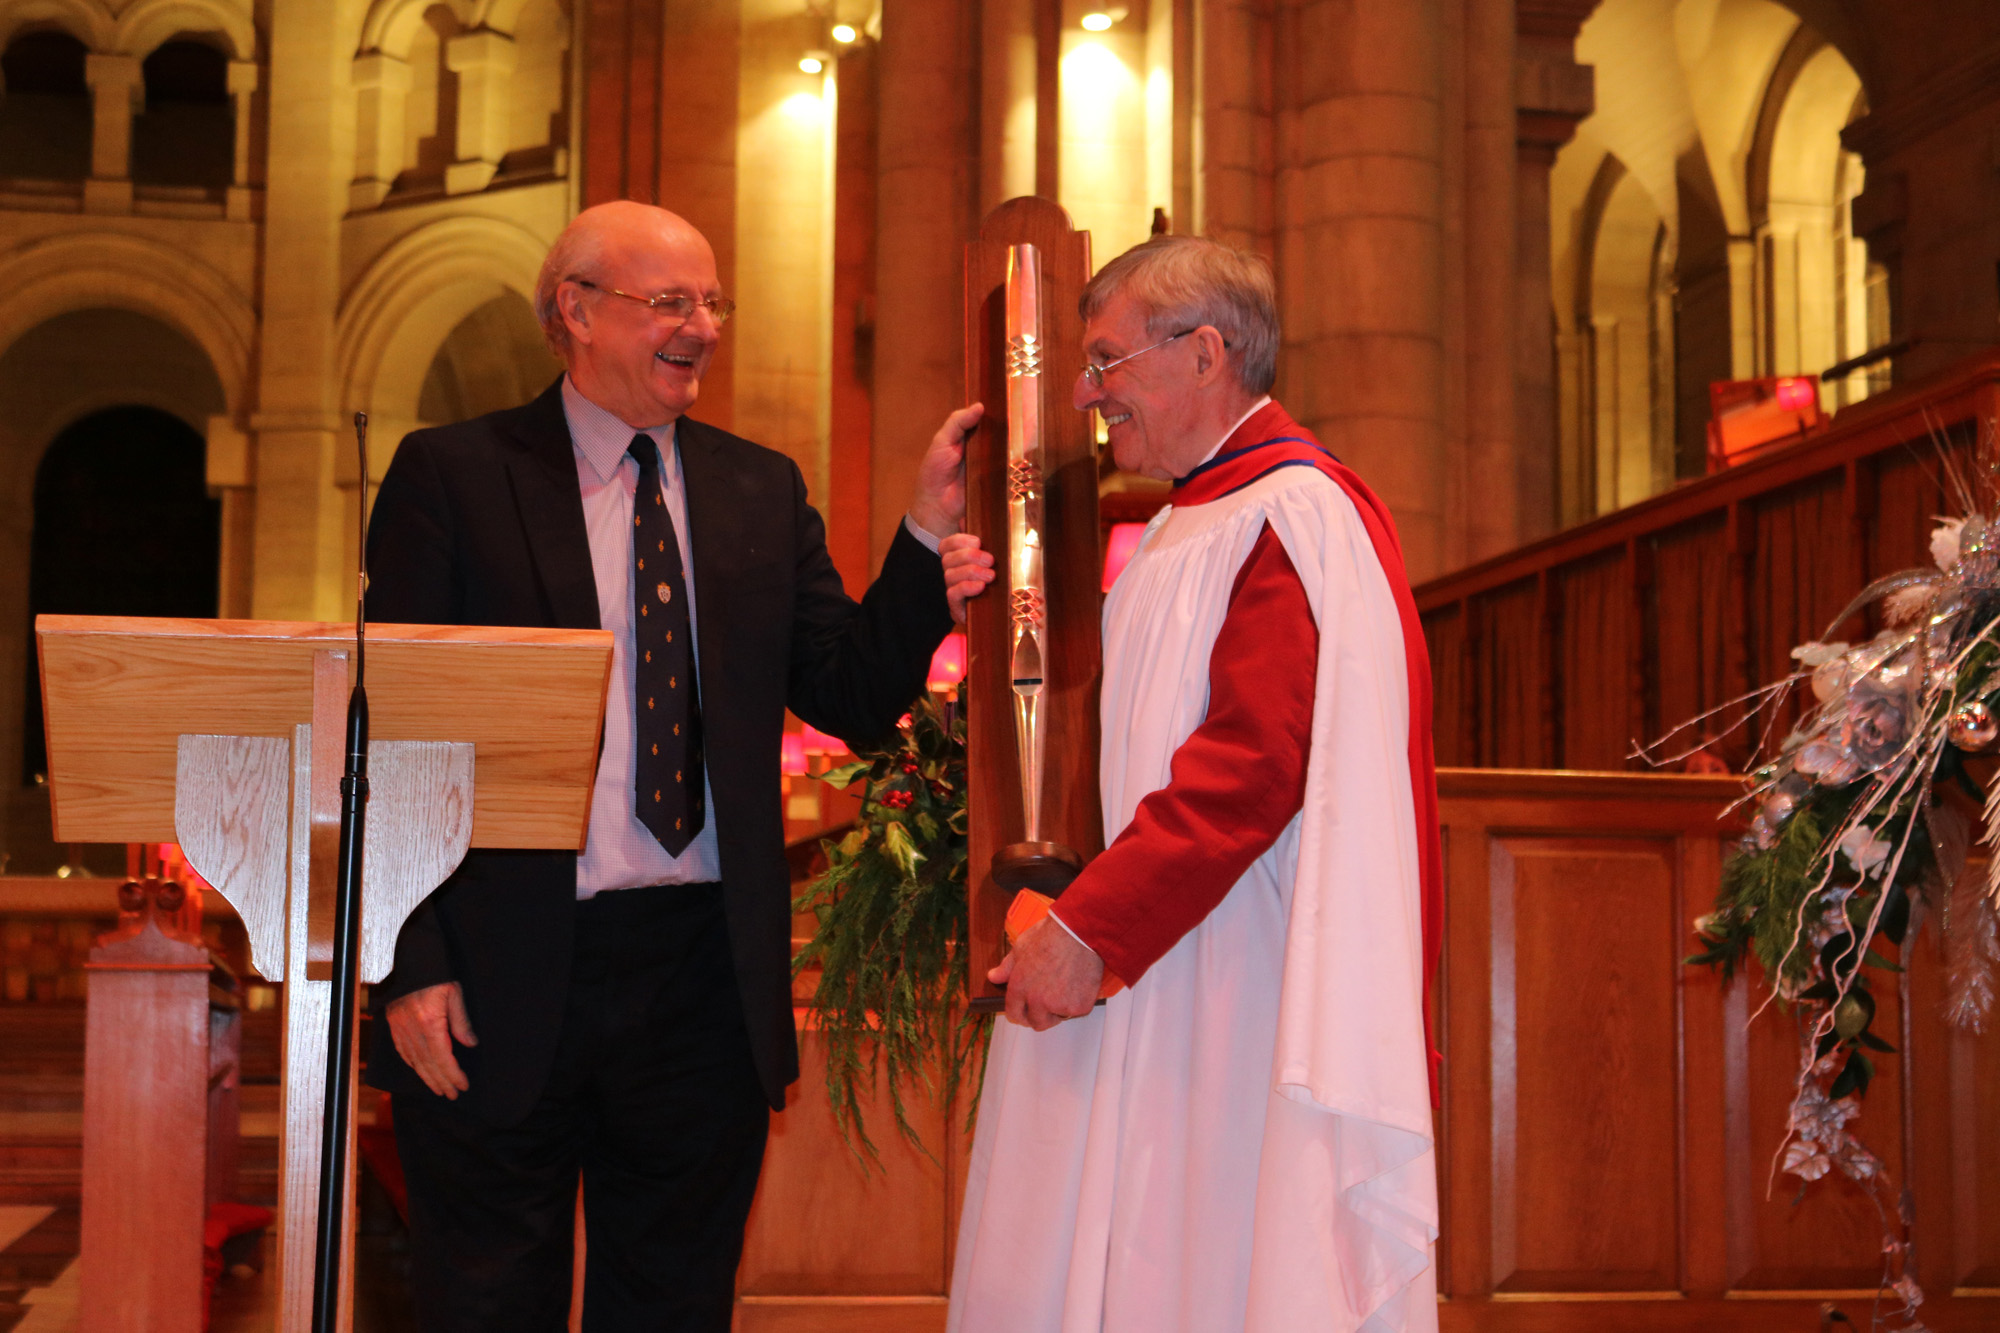 Mr Philip Prosser presented a mounted organ pipe to Mr Ian Barber following the Choral Evensong to mark Ian's departure from St Anne's Cathedral.